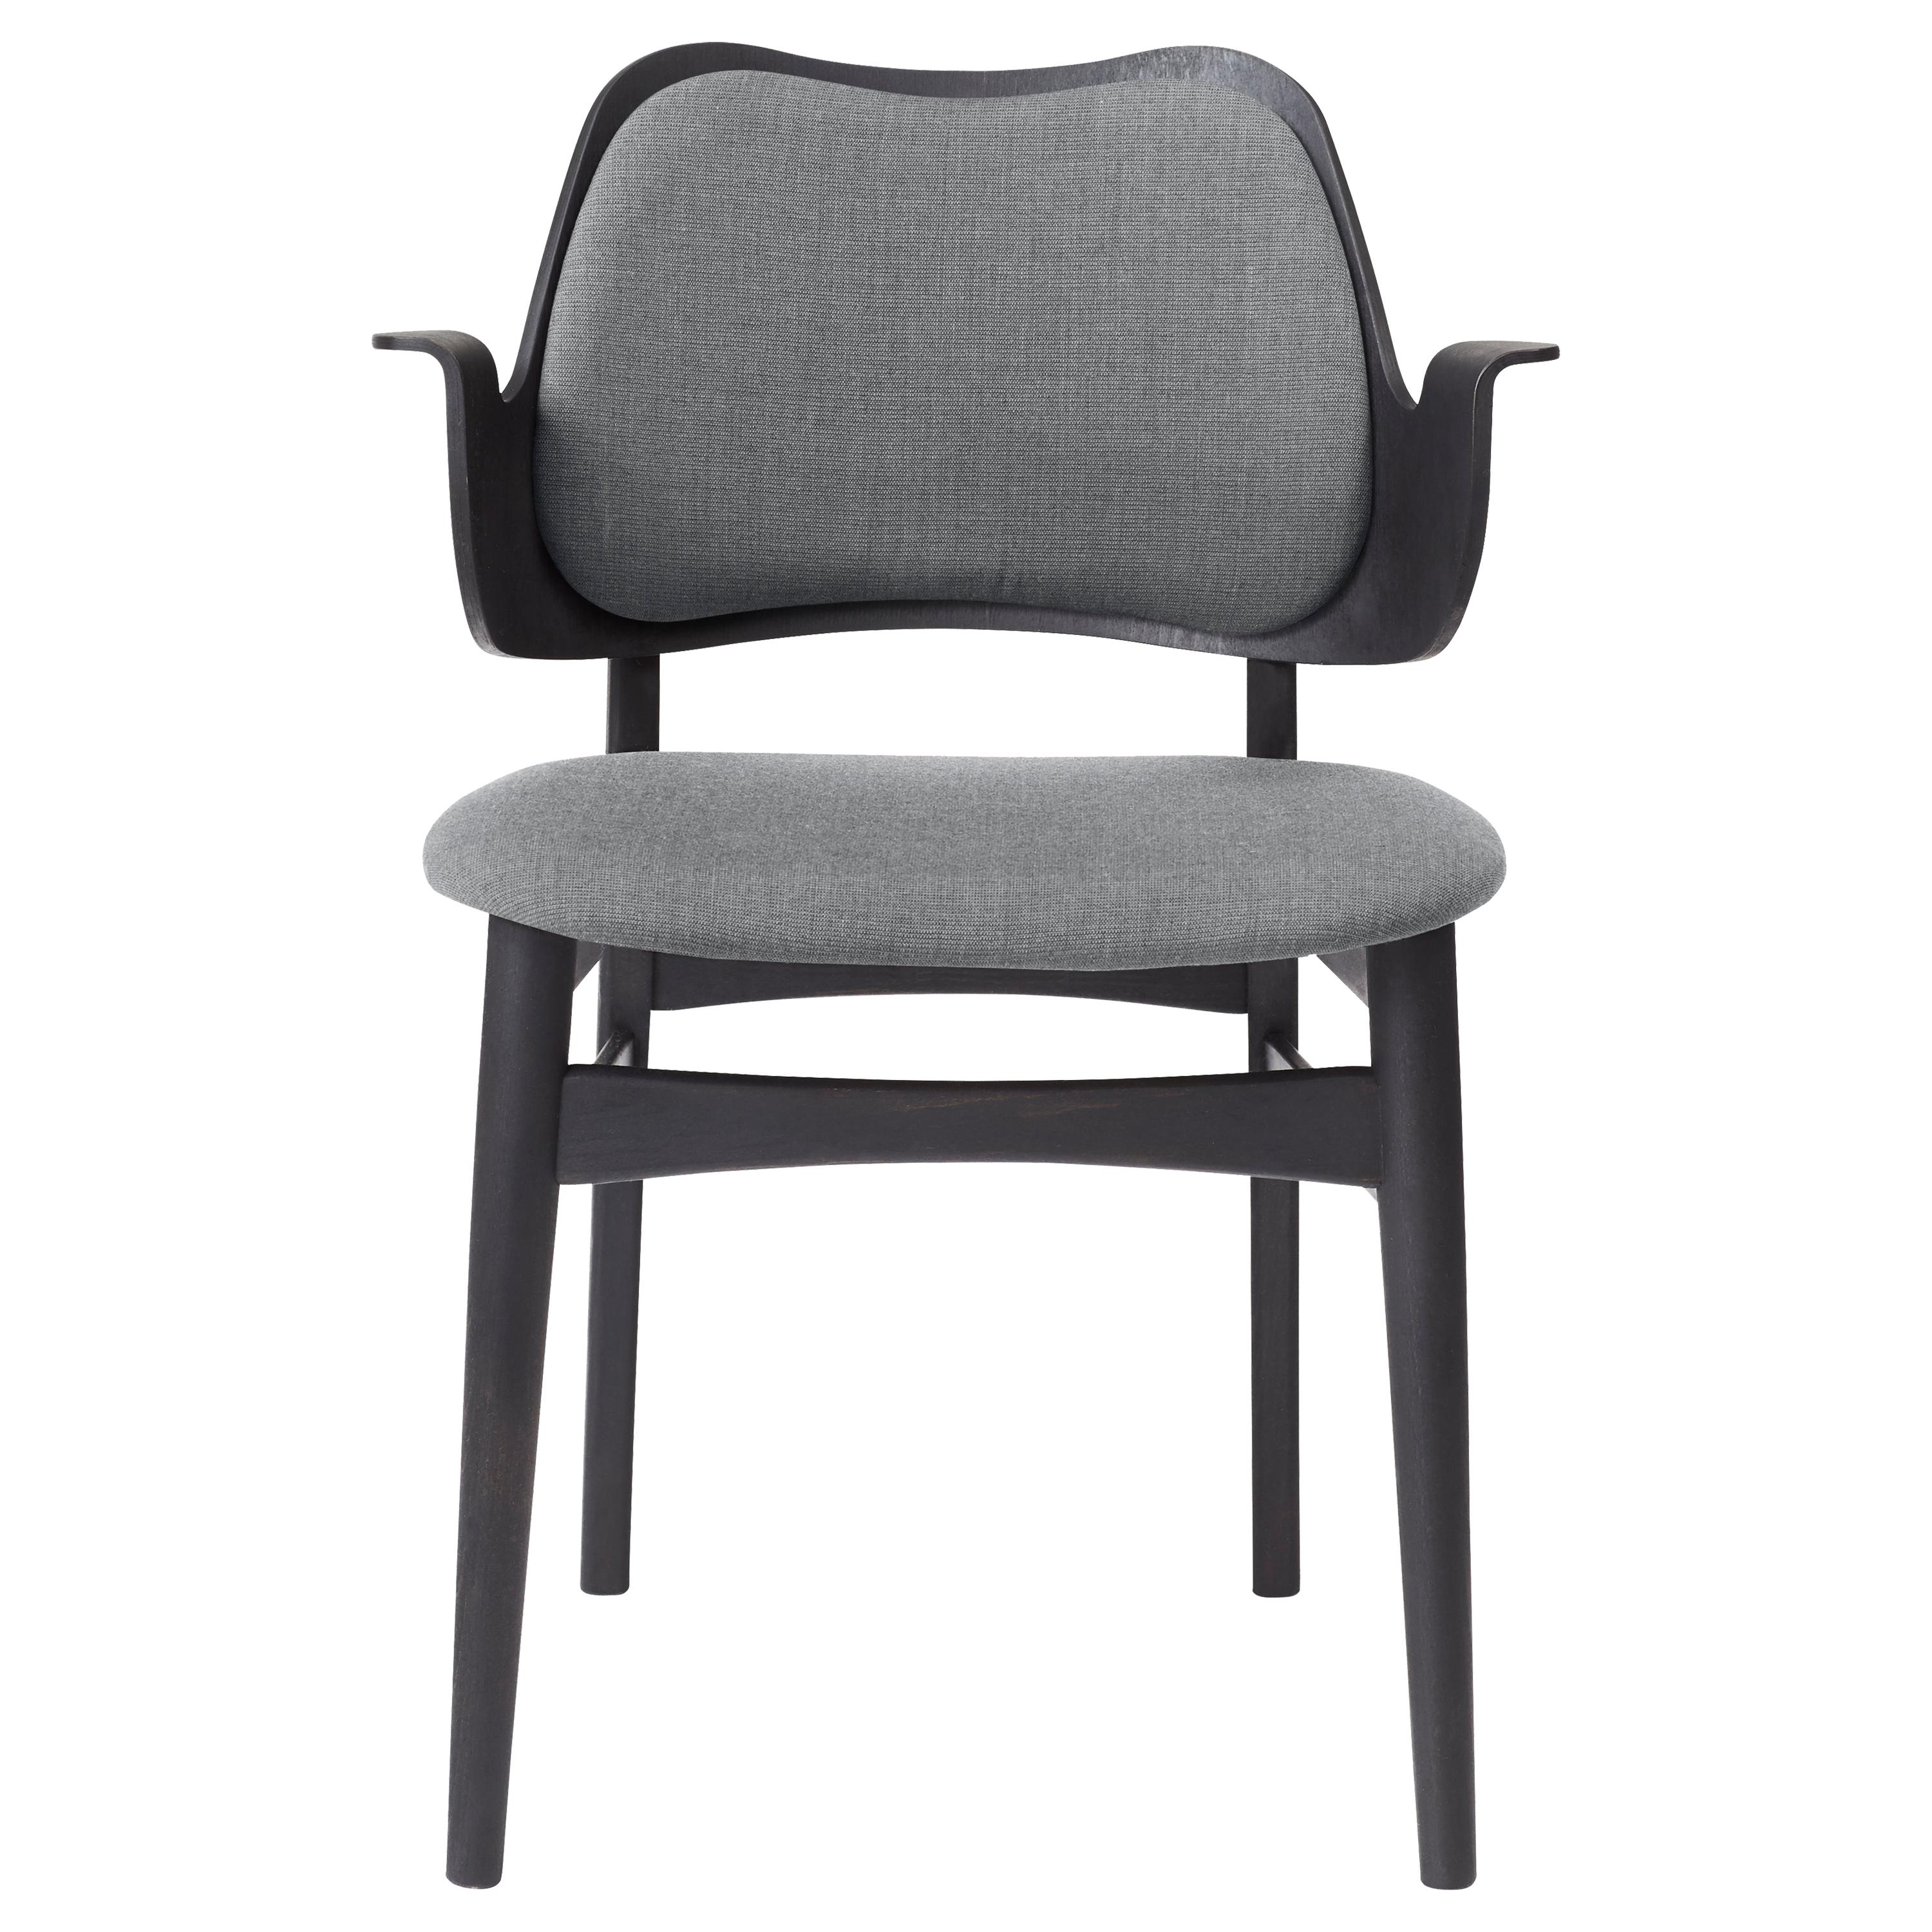 Warm Nordic Gesture Monochrome Fully Upholstered Chair in Black, by Hans Olsen